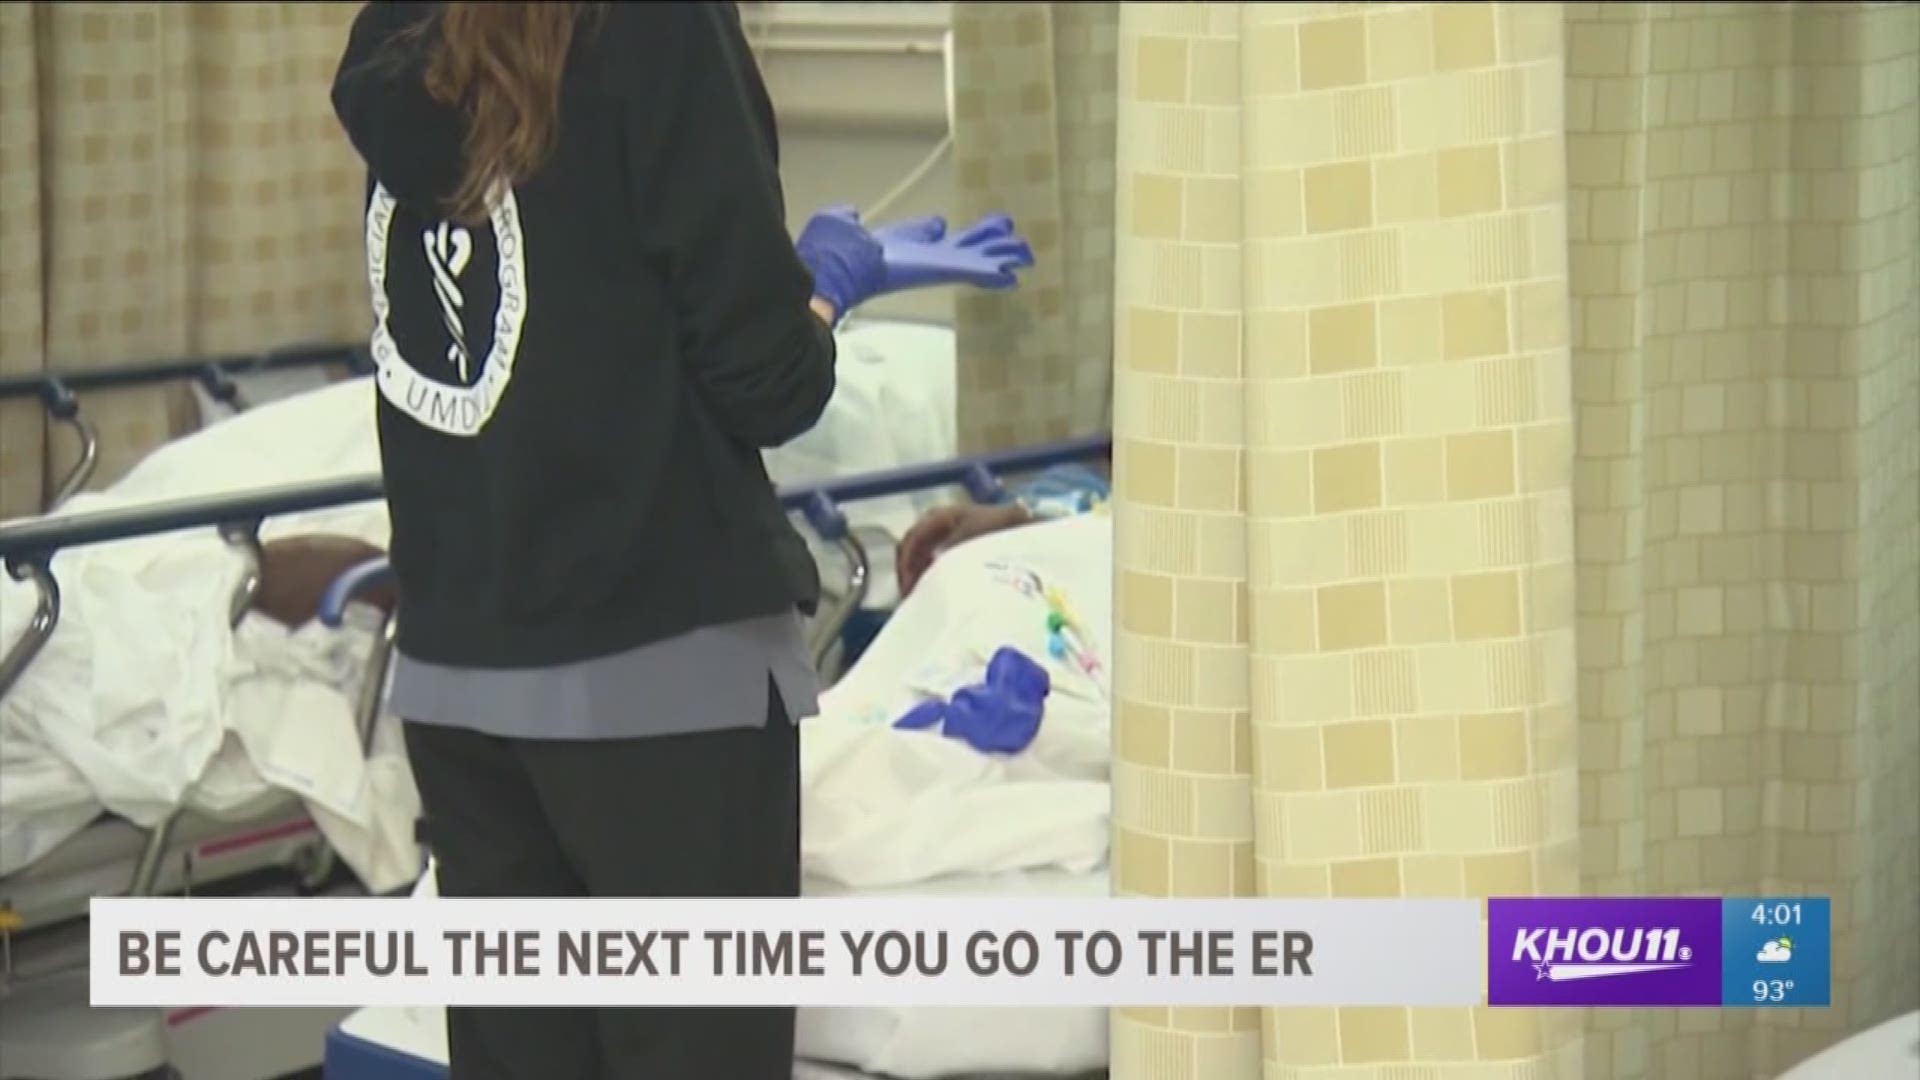 Blue Cross Blue Shield says it will not pay ER bills if they are not for emergencies.